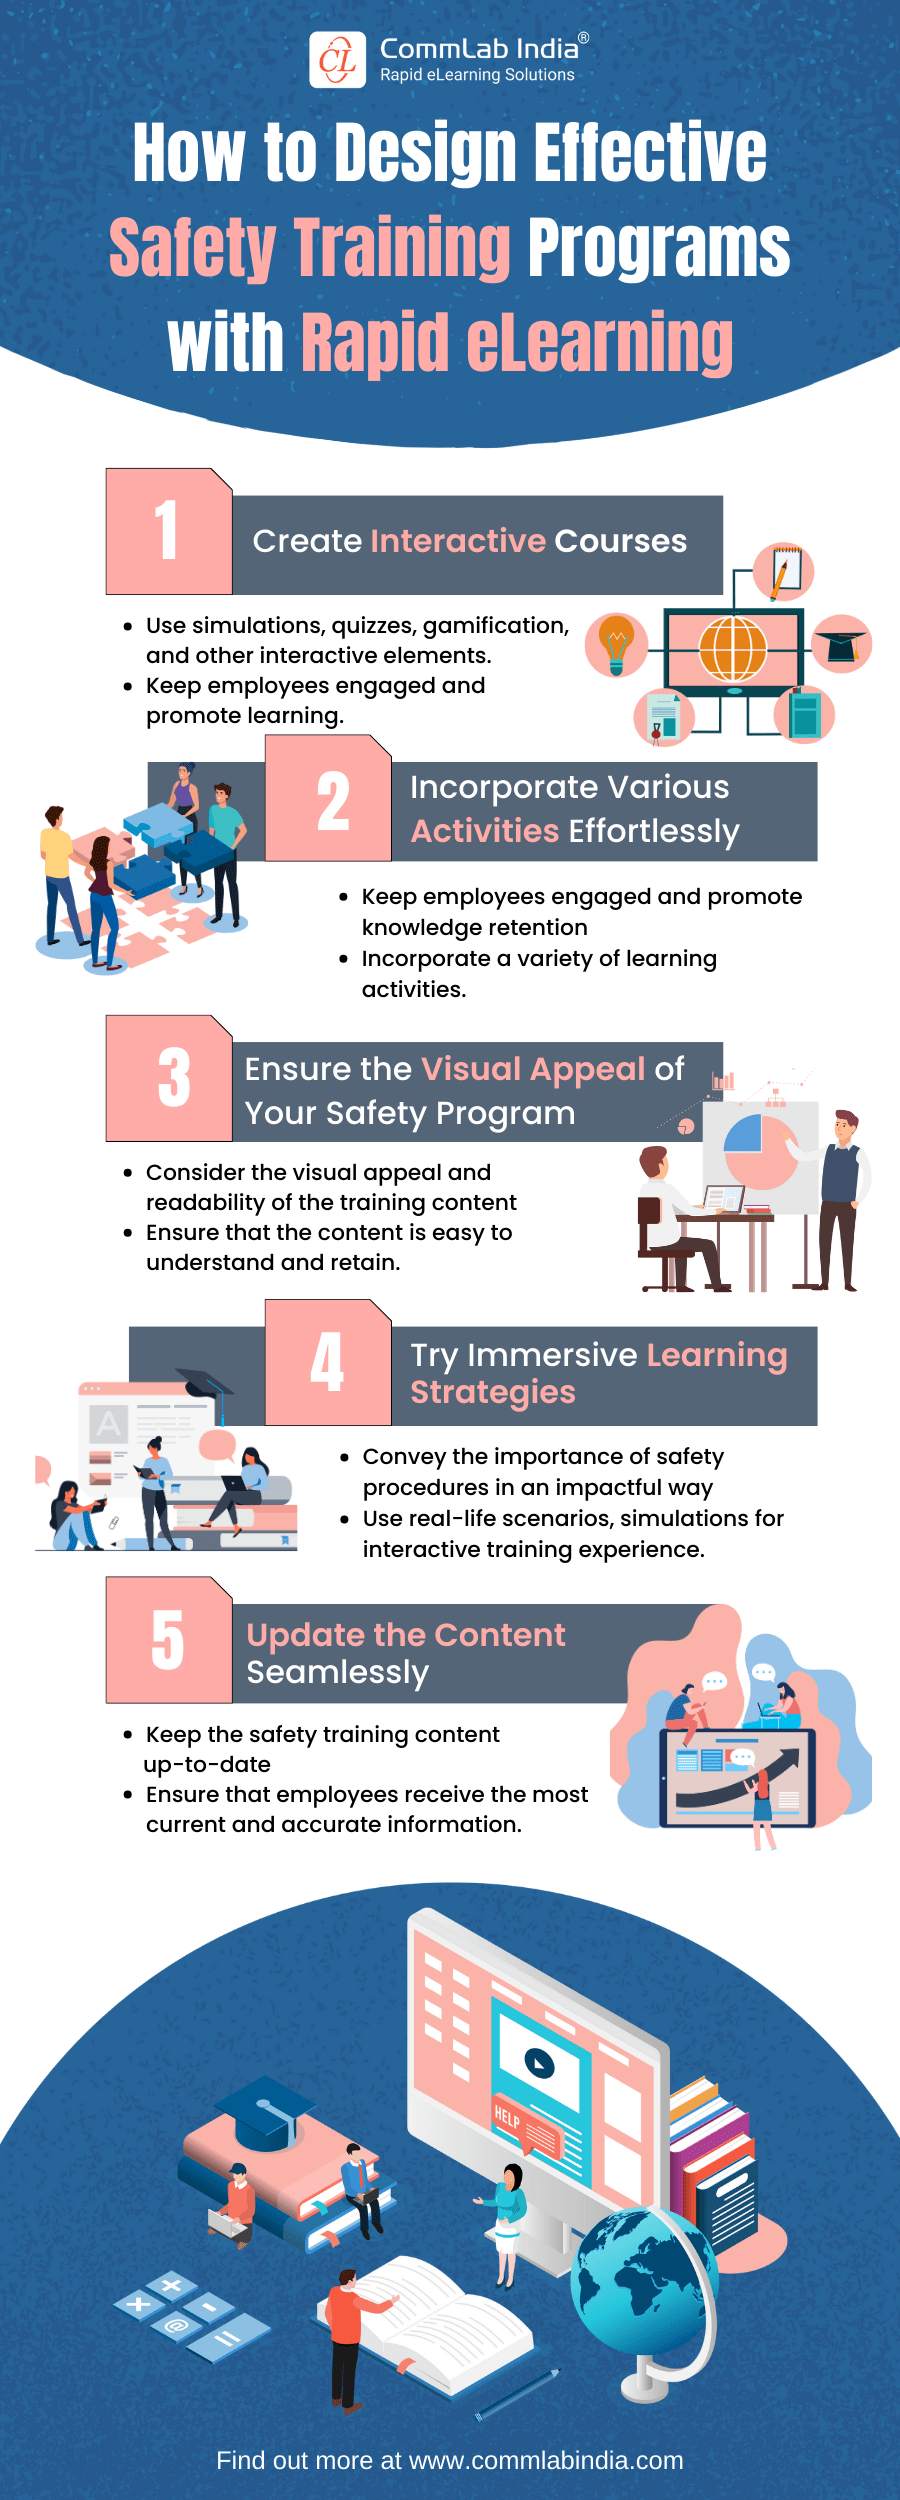 Rapid eLearning - For Safety Training Programs